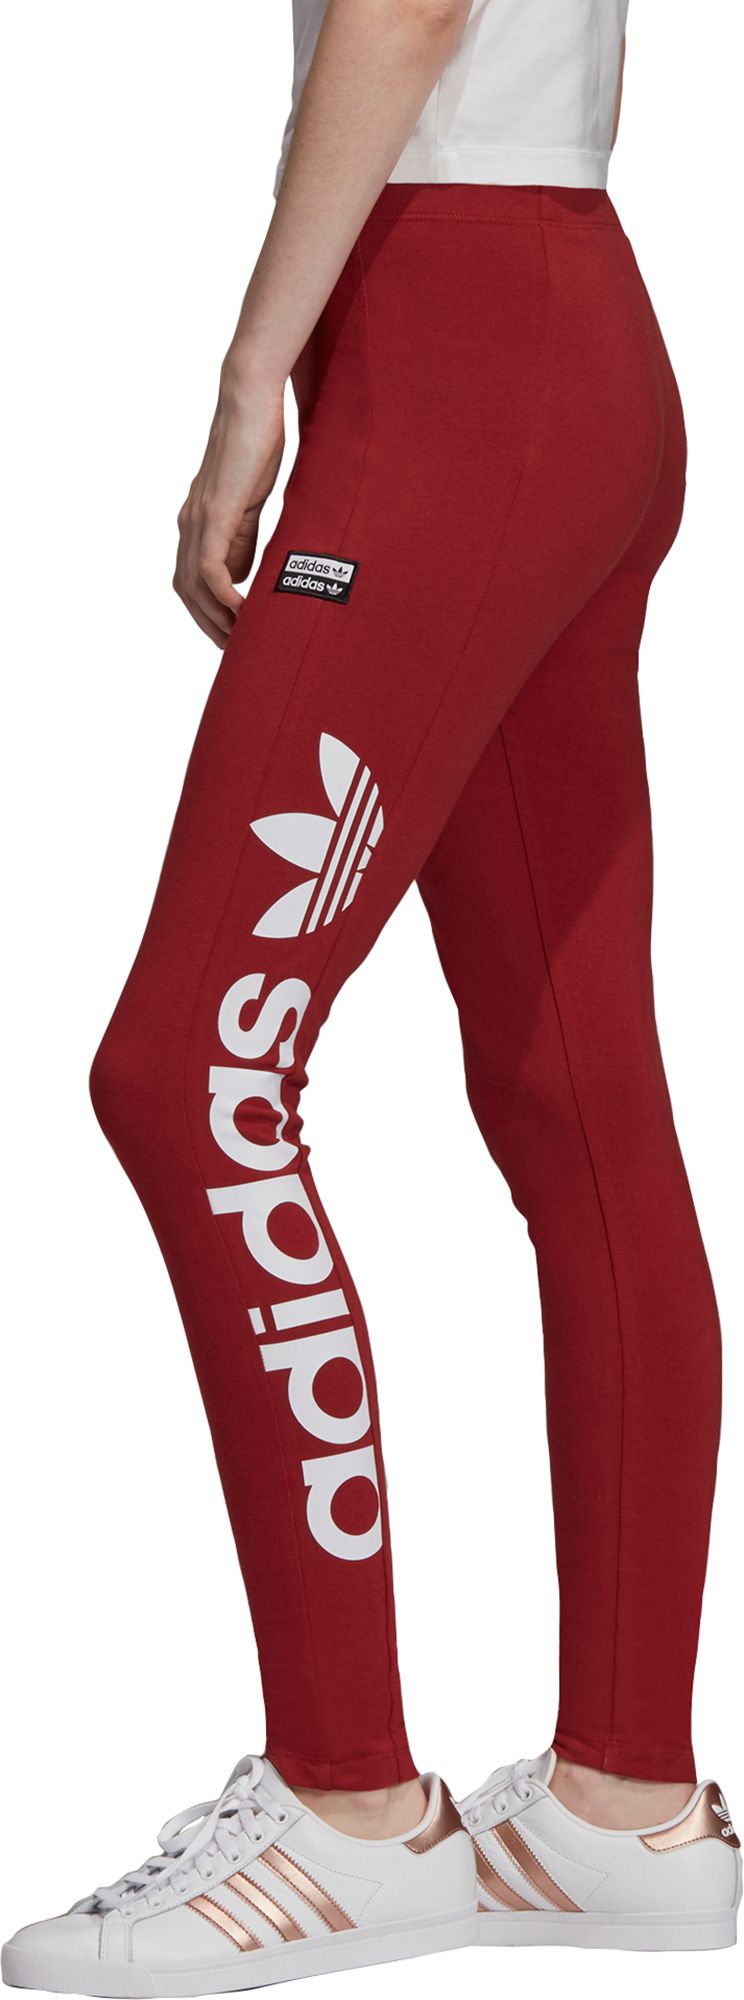 red adidas tights womens